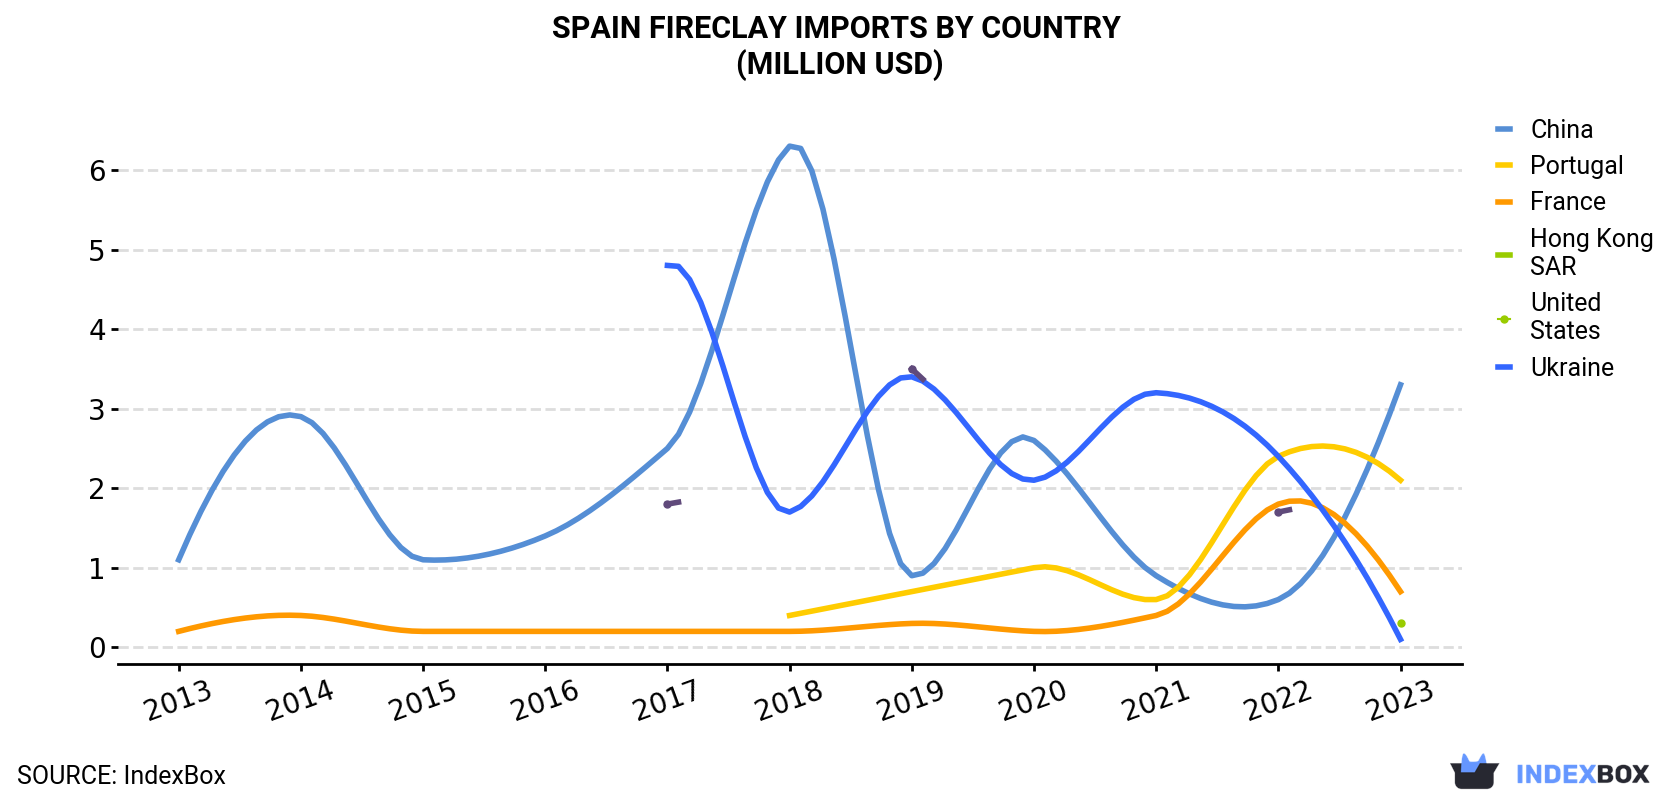 Spain Fireclay Imports By Country (Million USD)